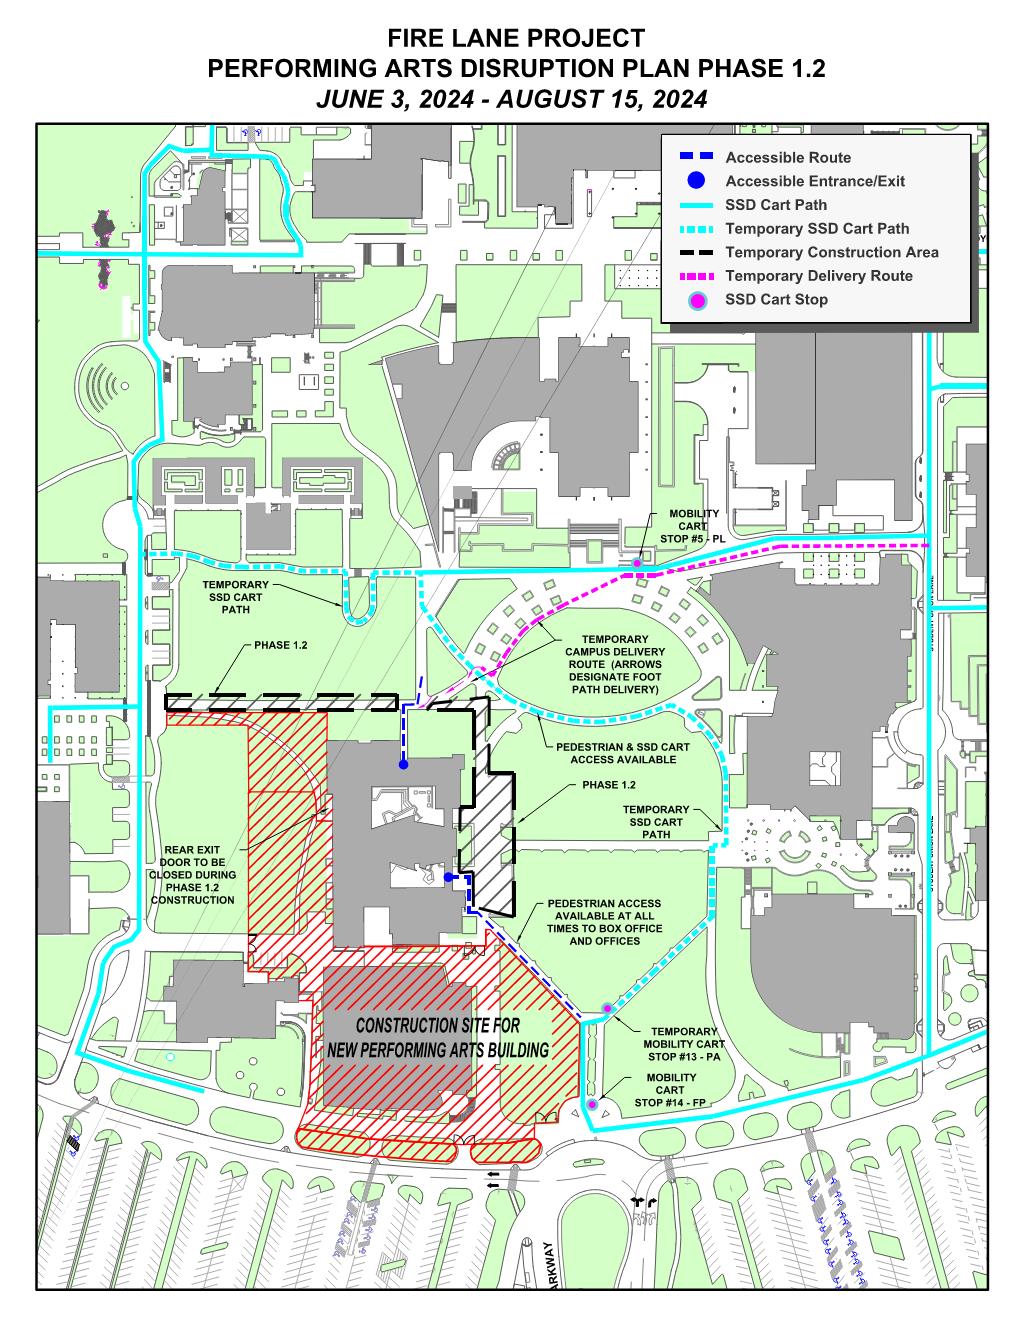 Campus disruption map depicting construction fence areas related to the Performing Arts Building Annex project. 